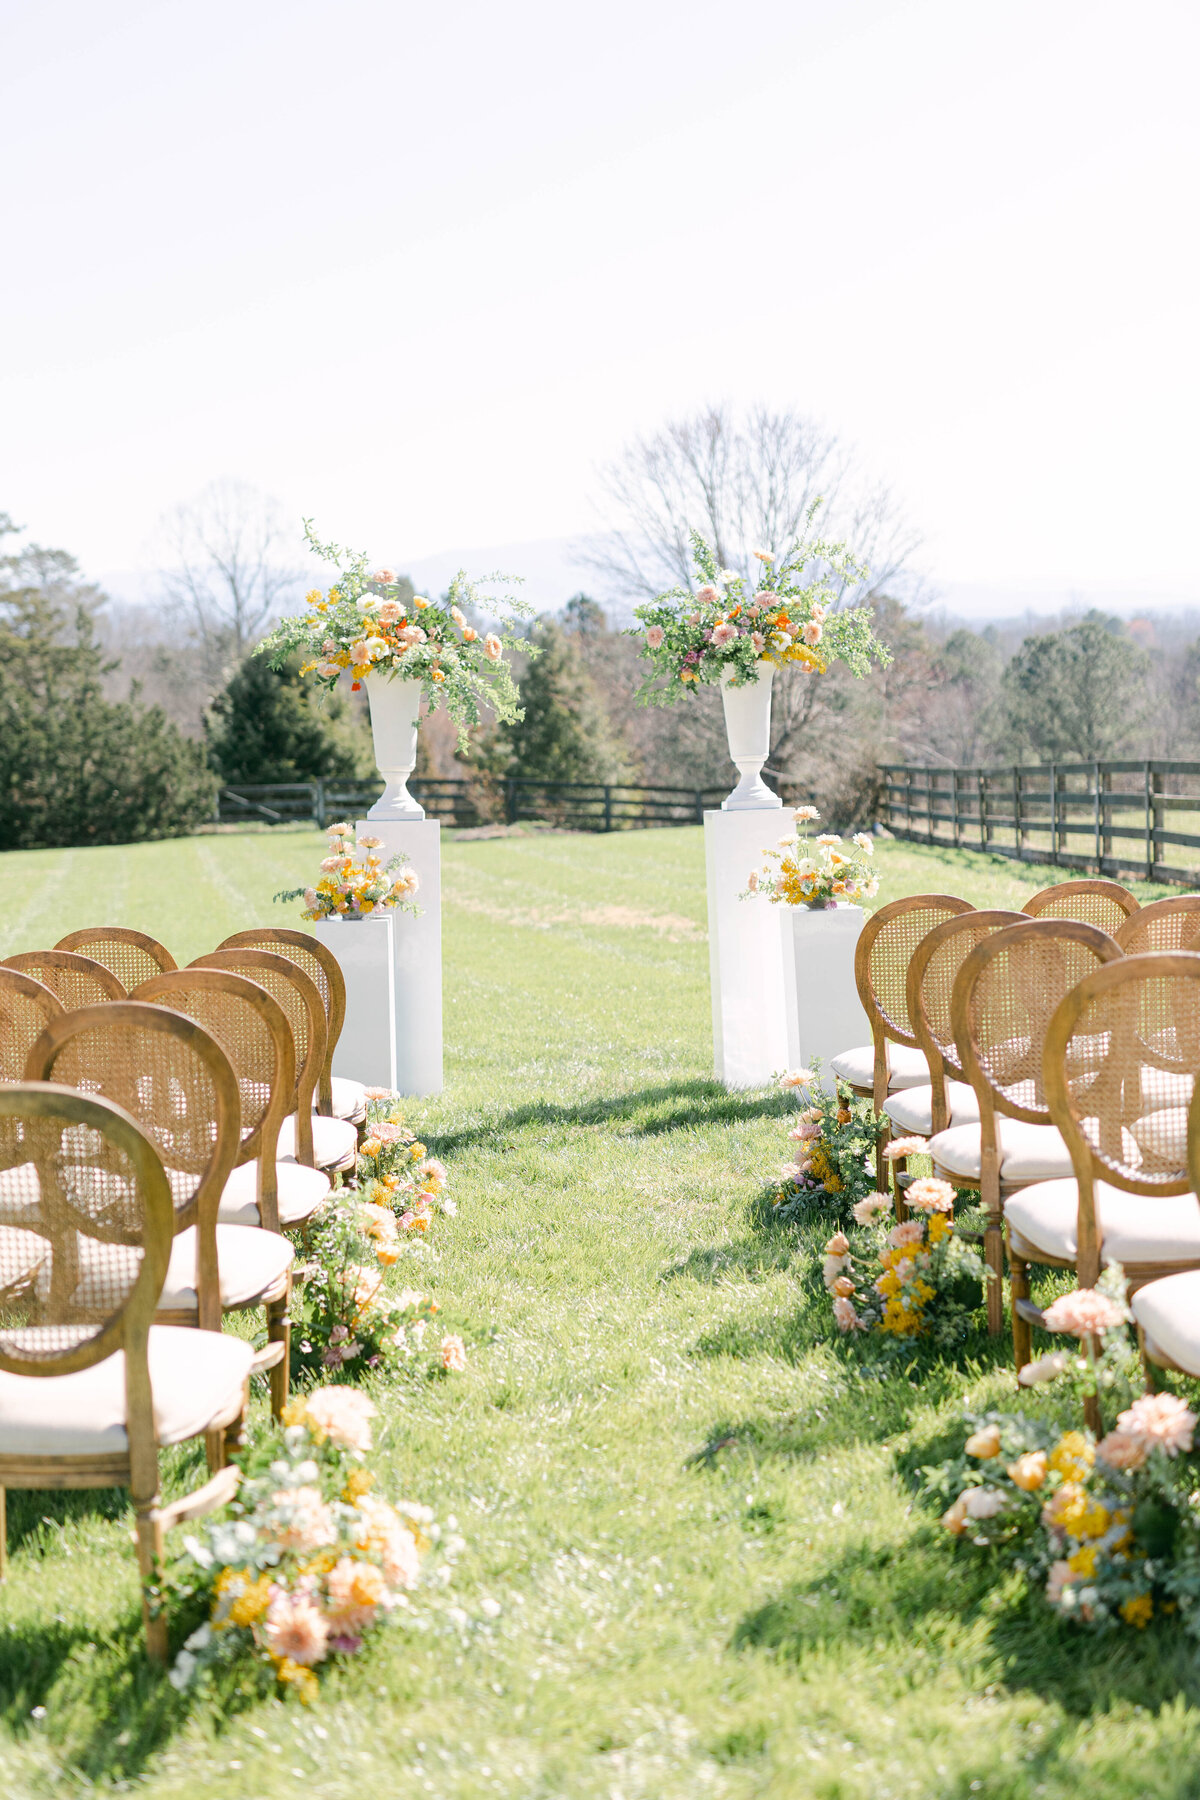 GA wedding ceremony bright florals on white podiums and french inspired chairs